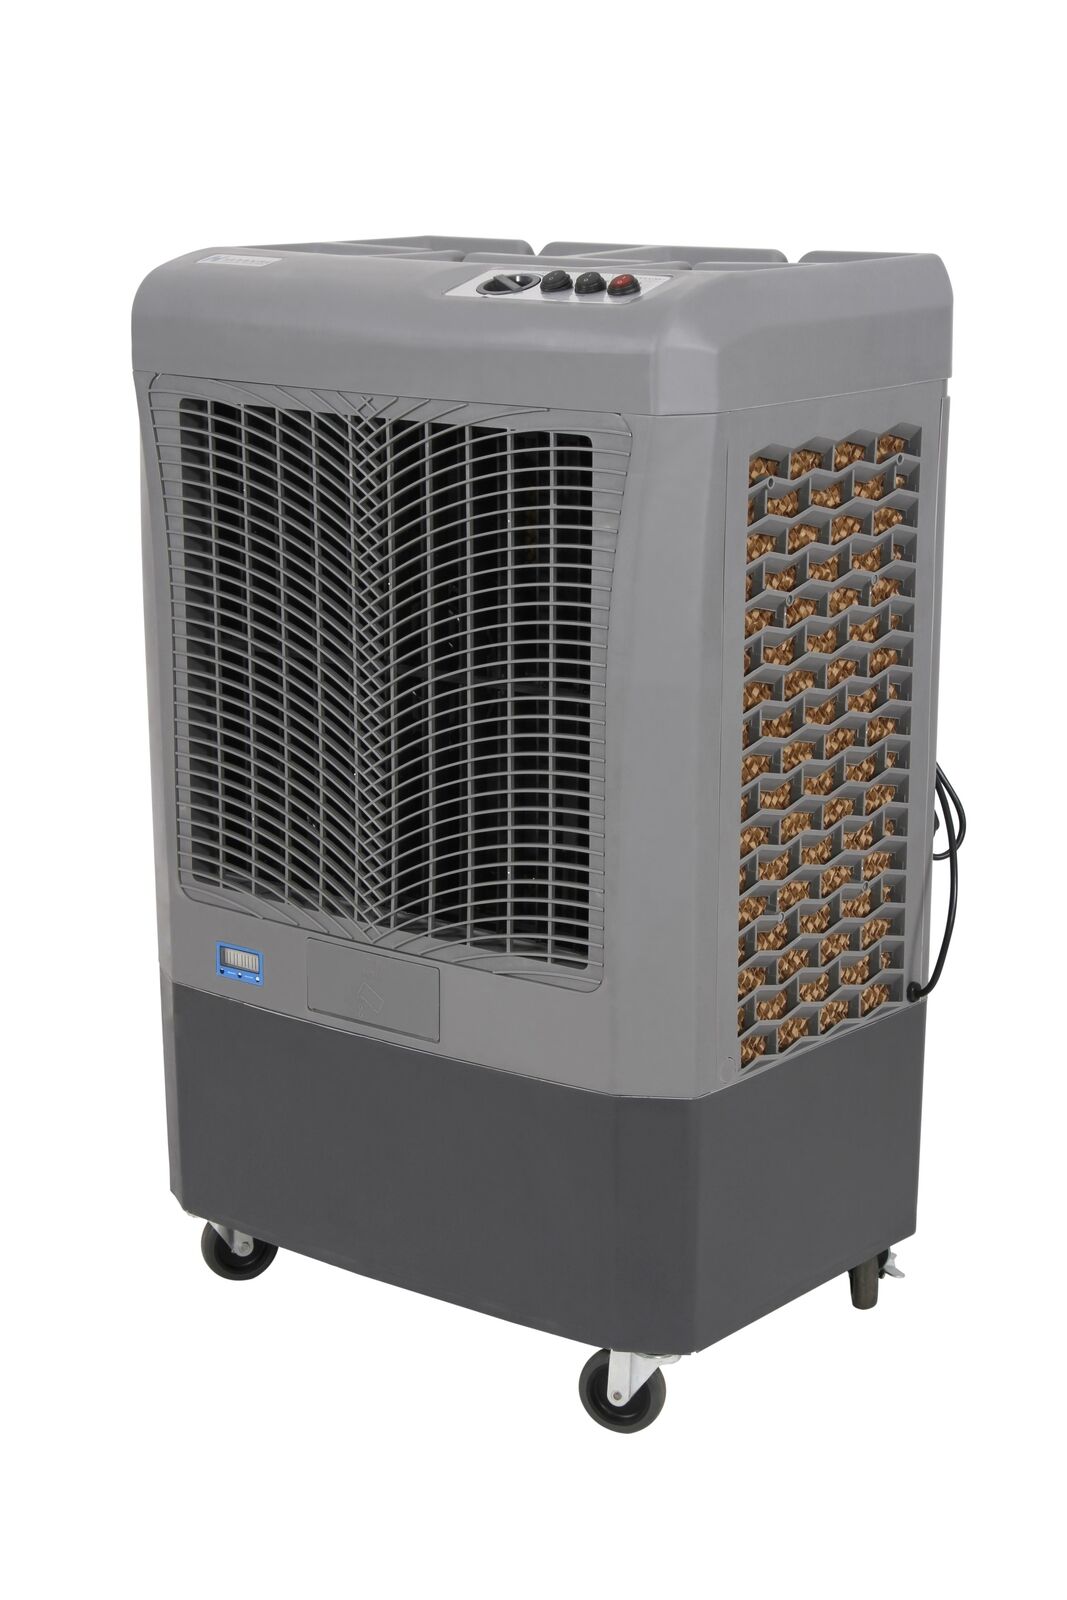 Hessaire MC37M Indoor/Outdoor Portable 950 Sq Ft Evaporative Air Cooler - image 5 of 16